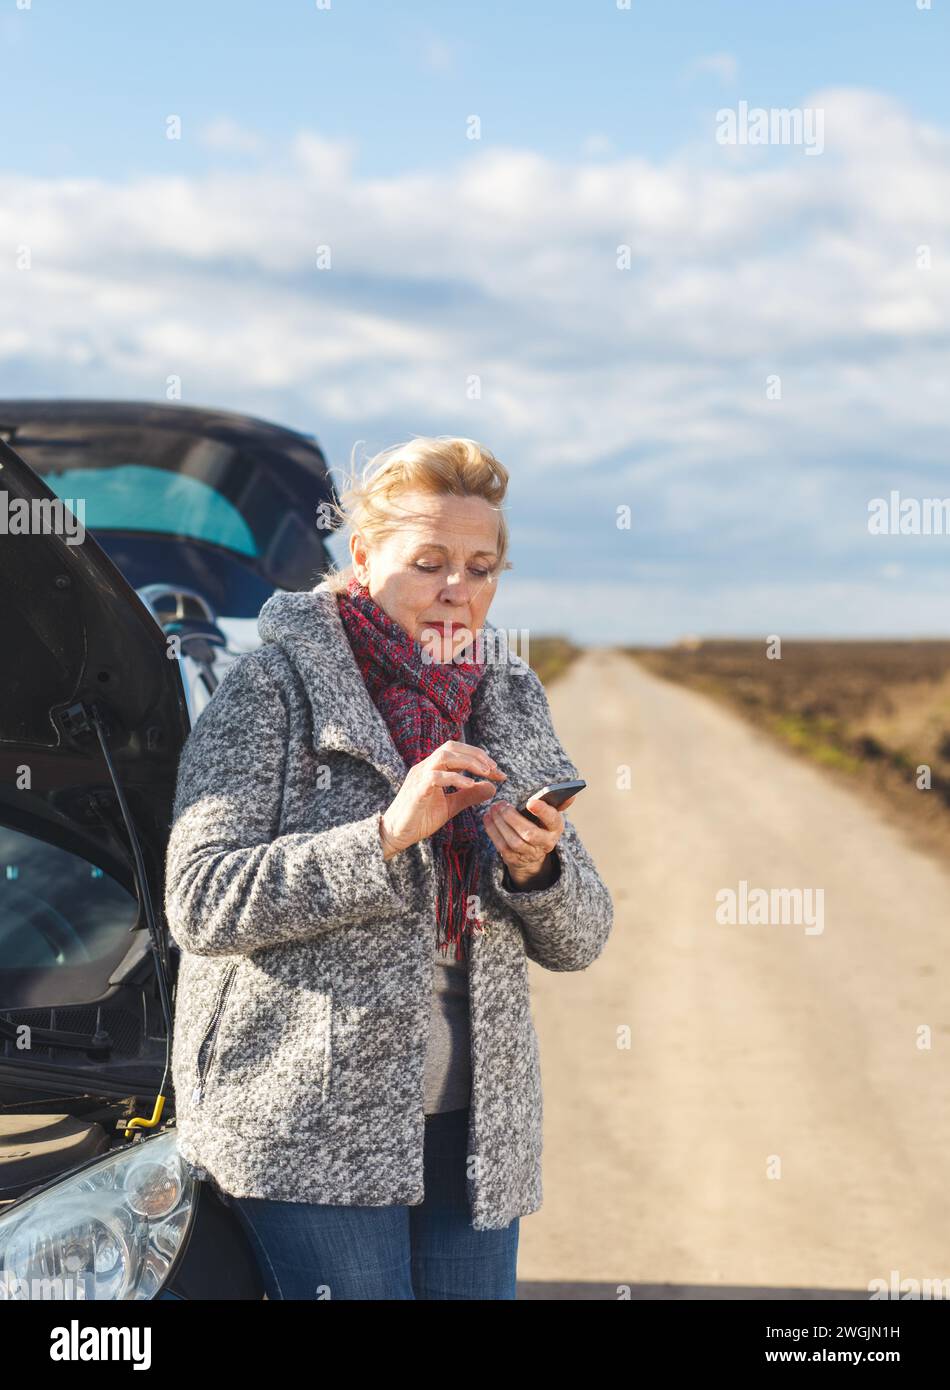 Senior woman on the road having engine failure, she is calling for assistance. Stock Photo